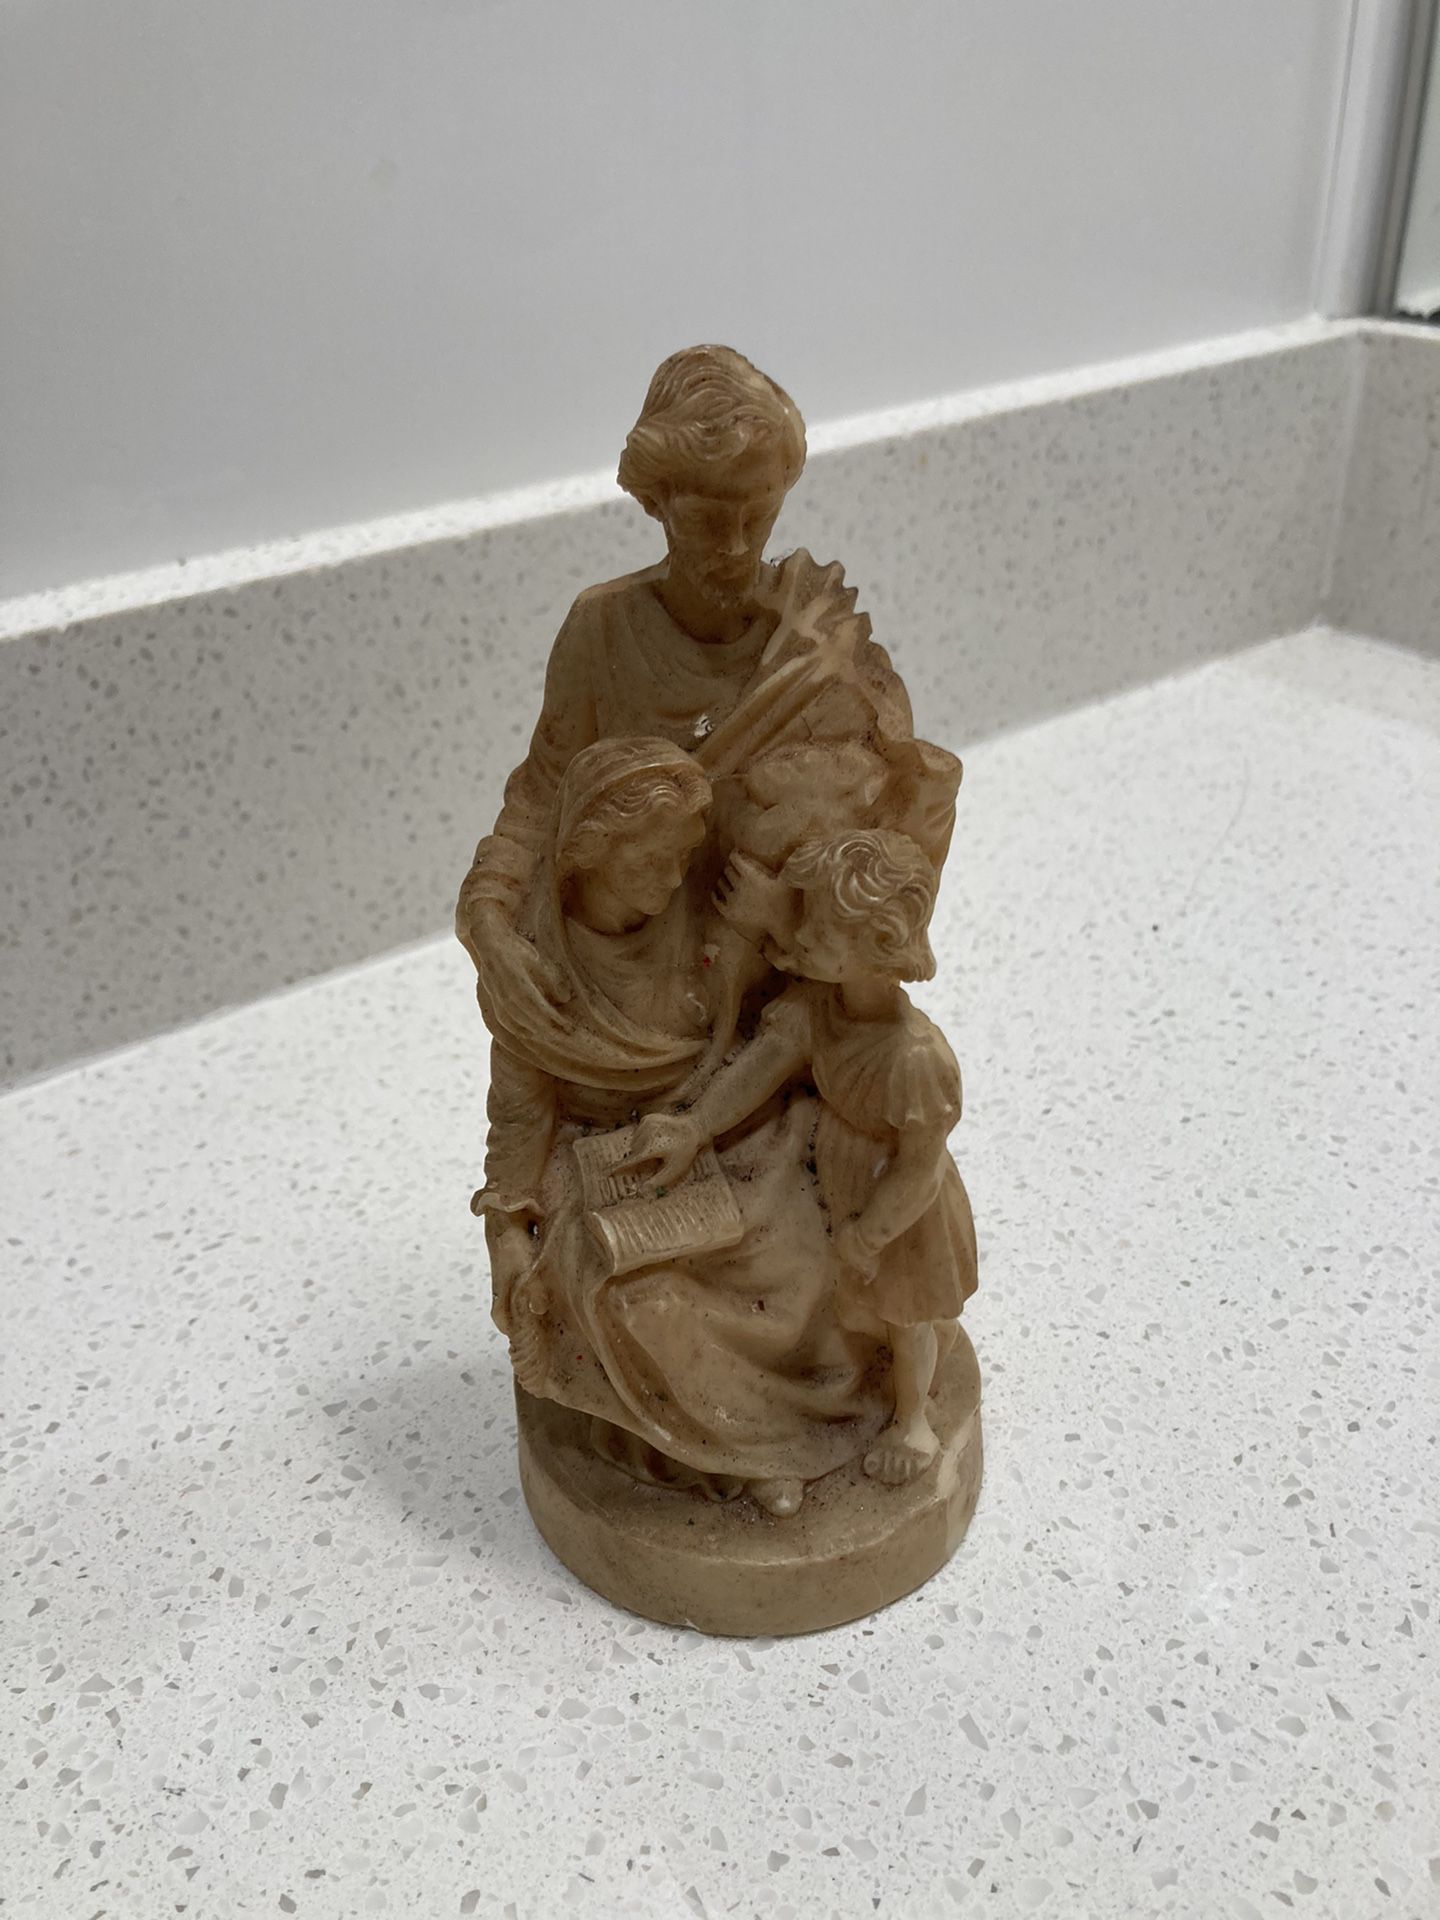 Vintage Joesph, Mary, Jesus and little girl statue